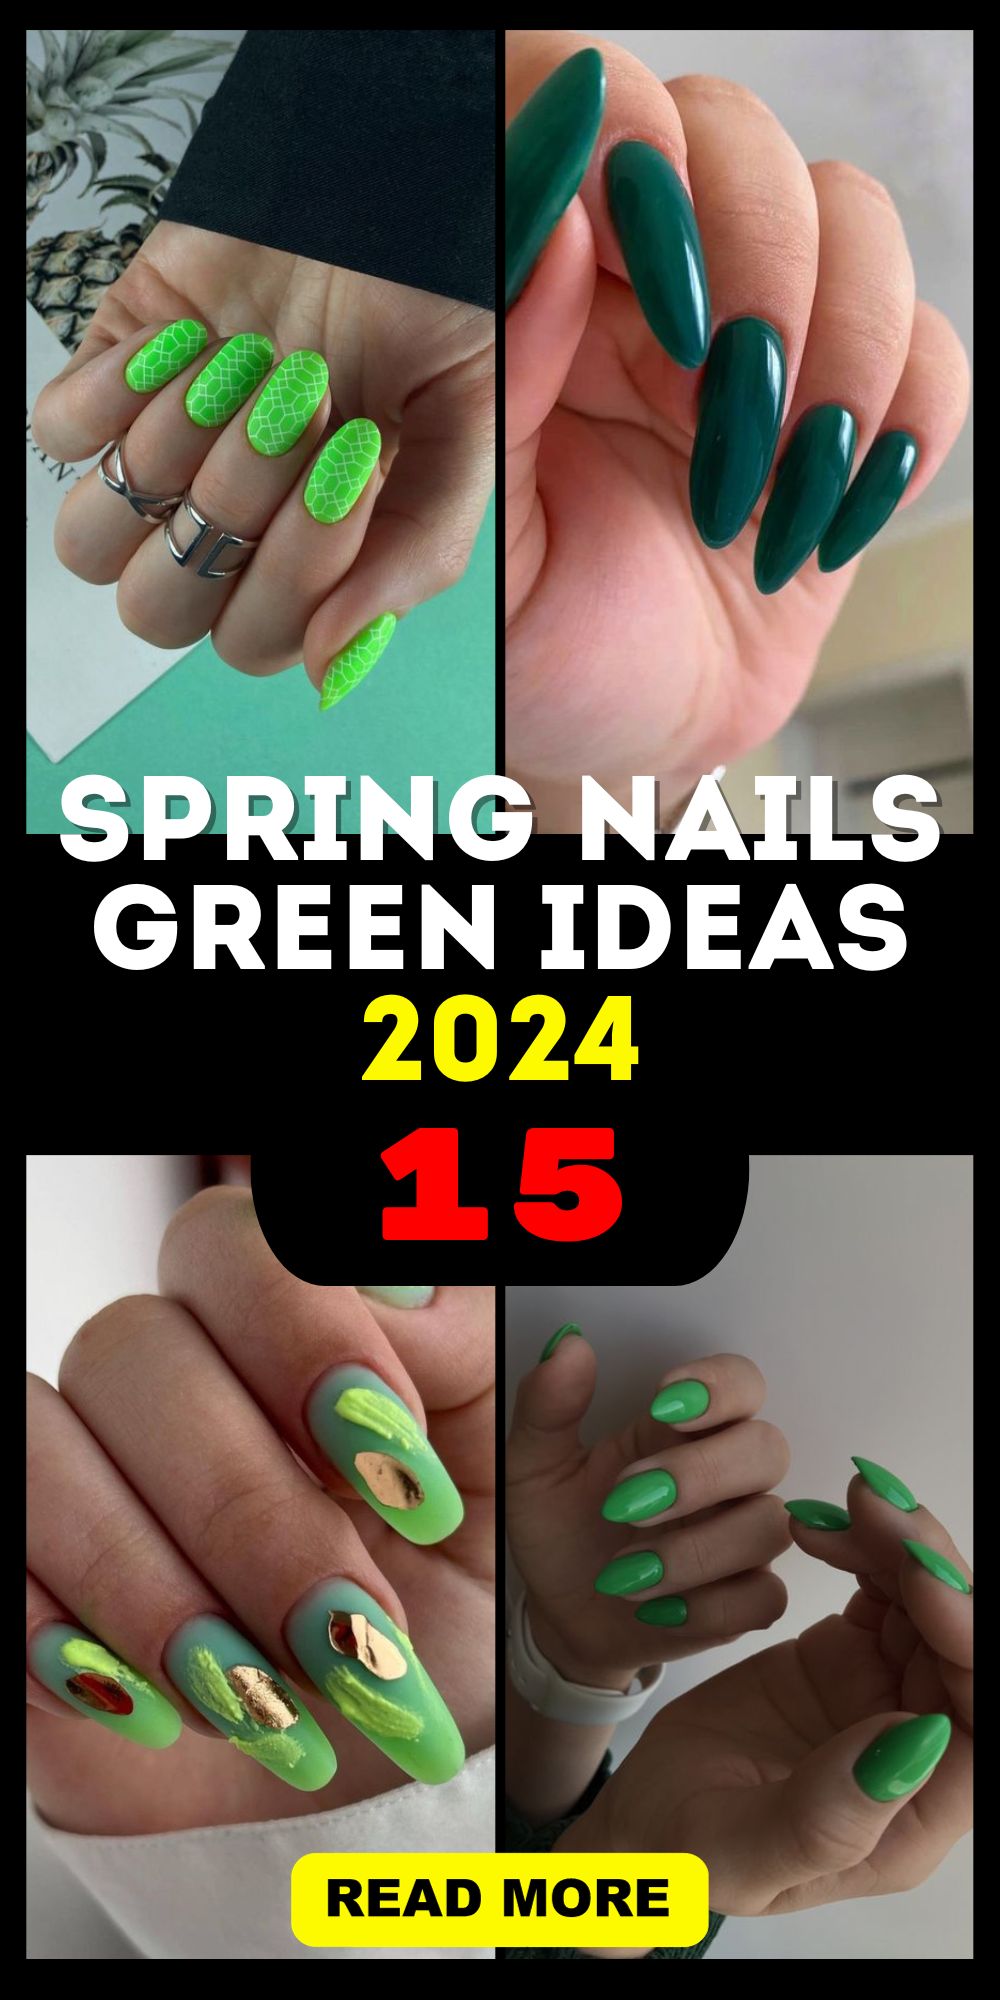 Explore Green Nail Designs for Spring 2024 - Fresh Styles & Ideas